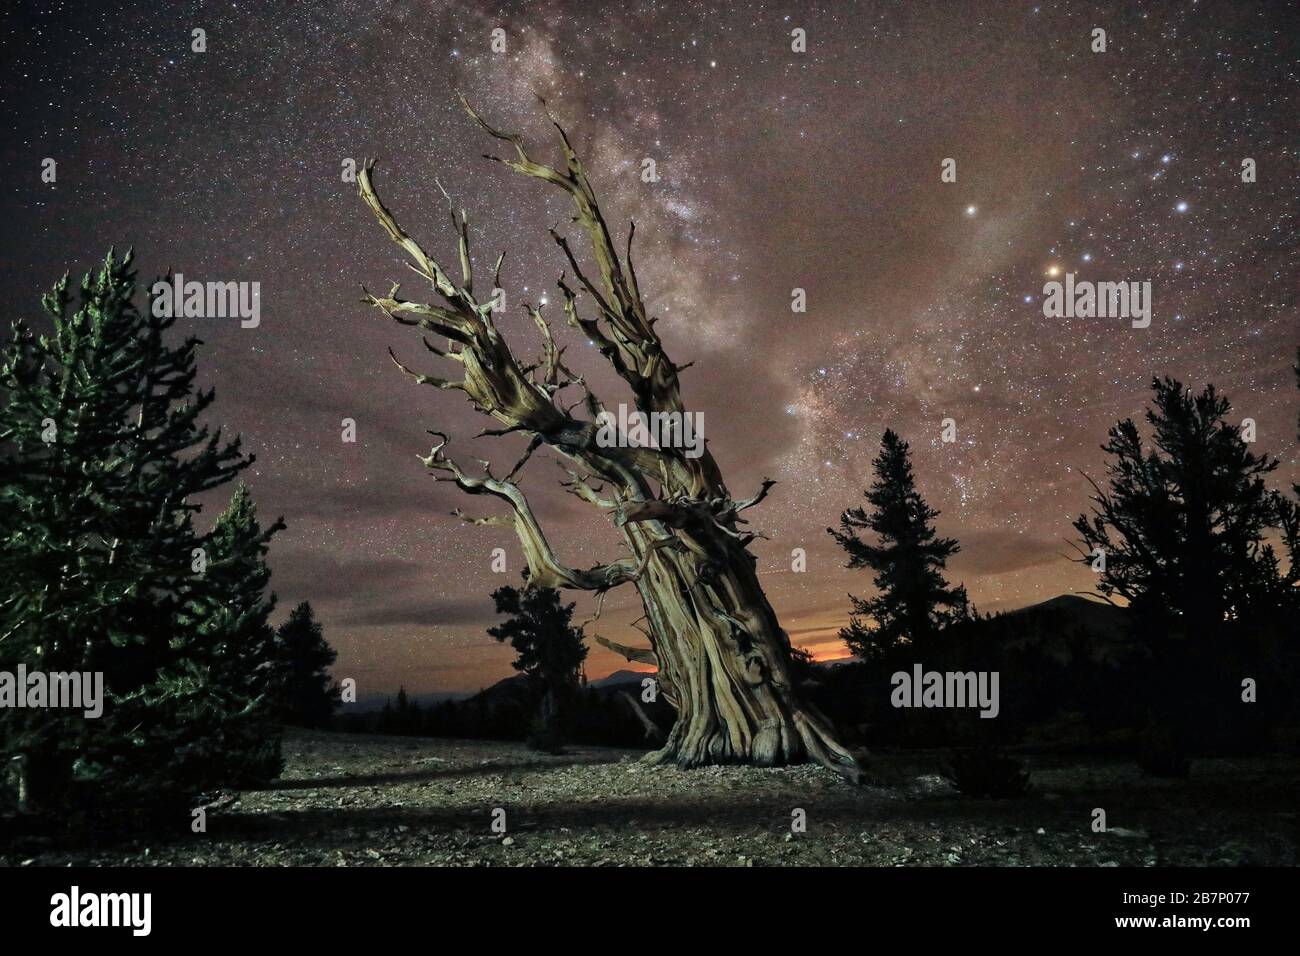 Camping Under the Stars and Milky Way in Bristlecone Pines Stock Photo